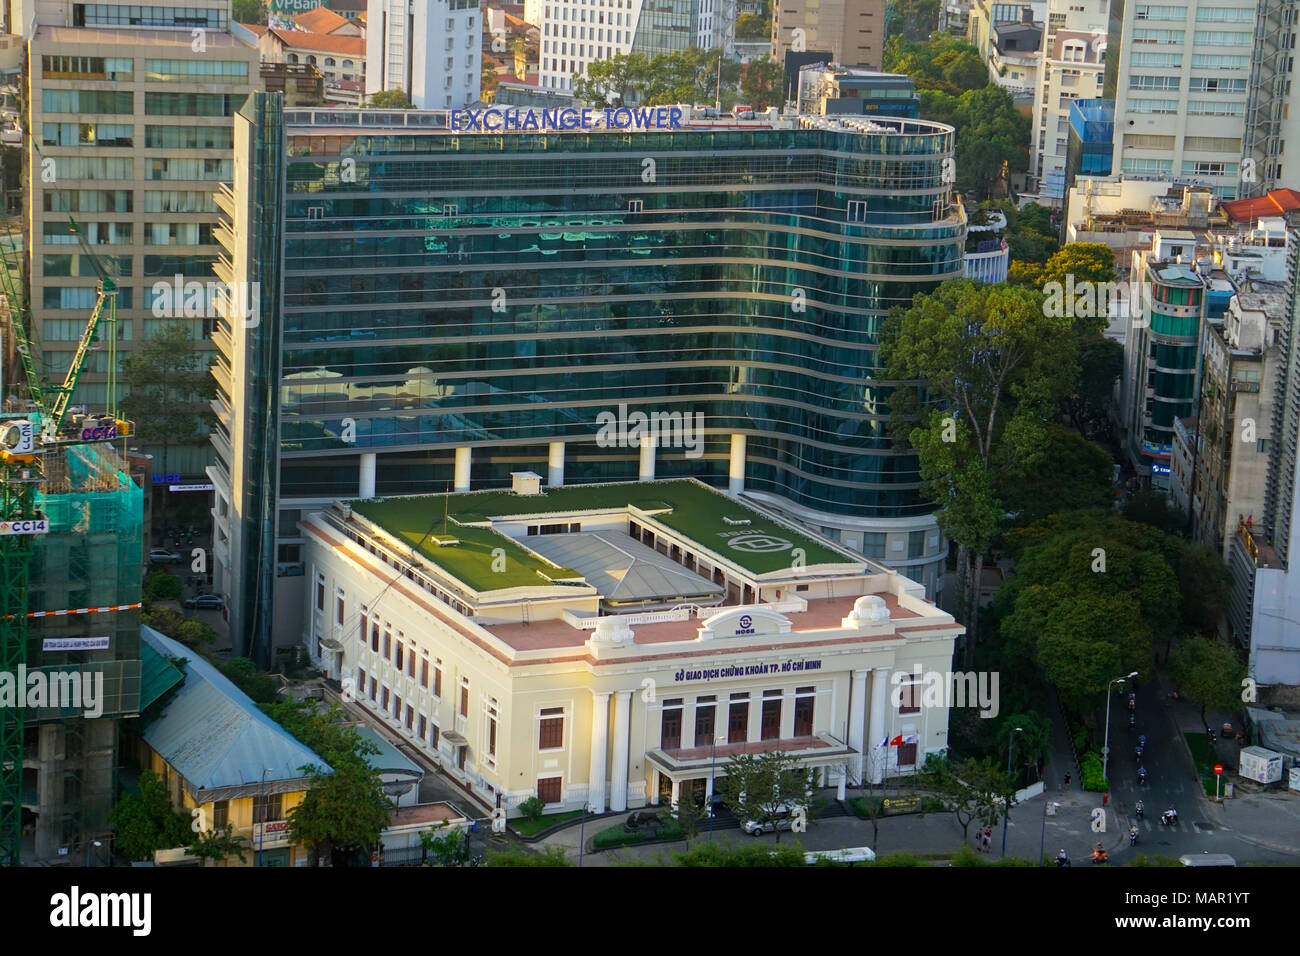 The Ho Chi Minh Stock Exchange and the Exchange Tower in District One, ( Saigon) Ho Chi Minh City, Vietnam Stock Photo - Alamy